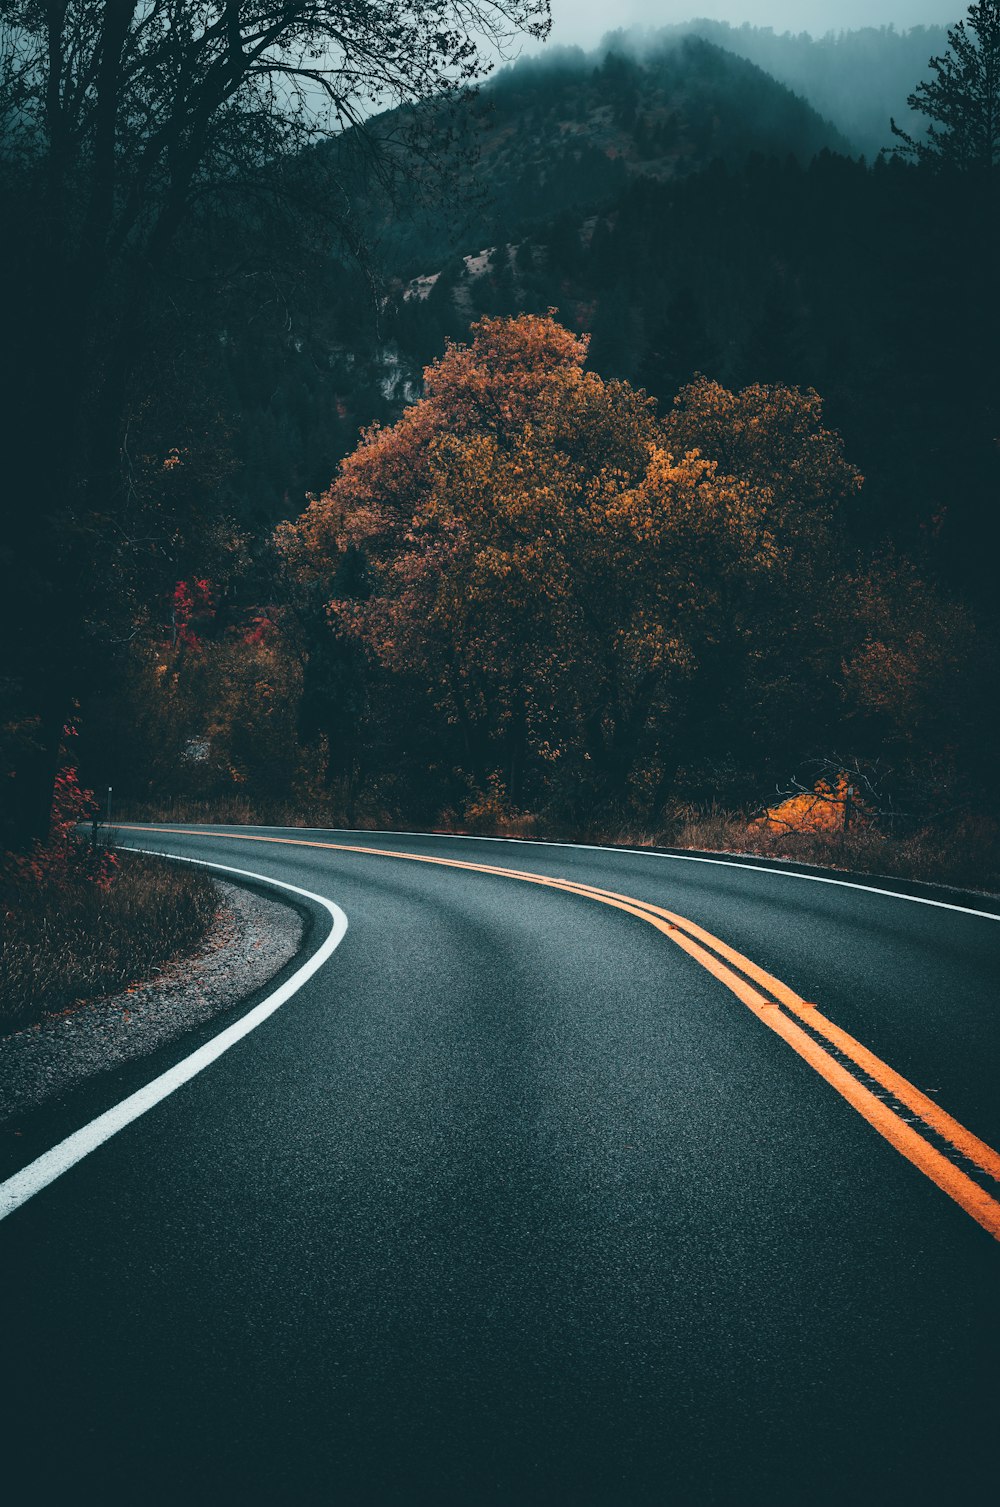 Road Background Pictures | Download Free Images on Unsplash